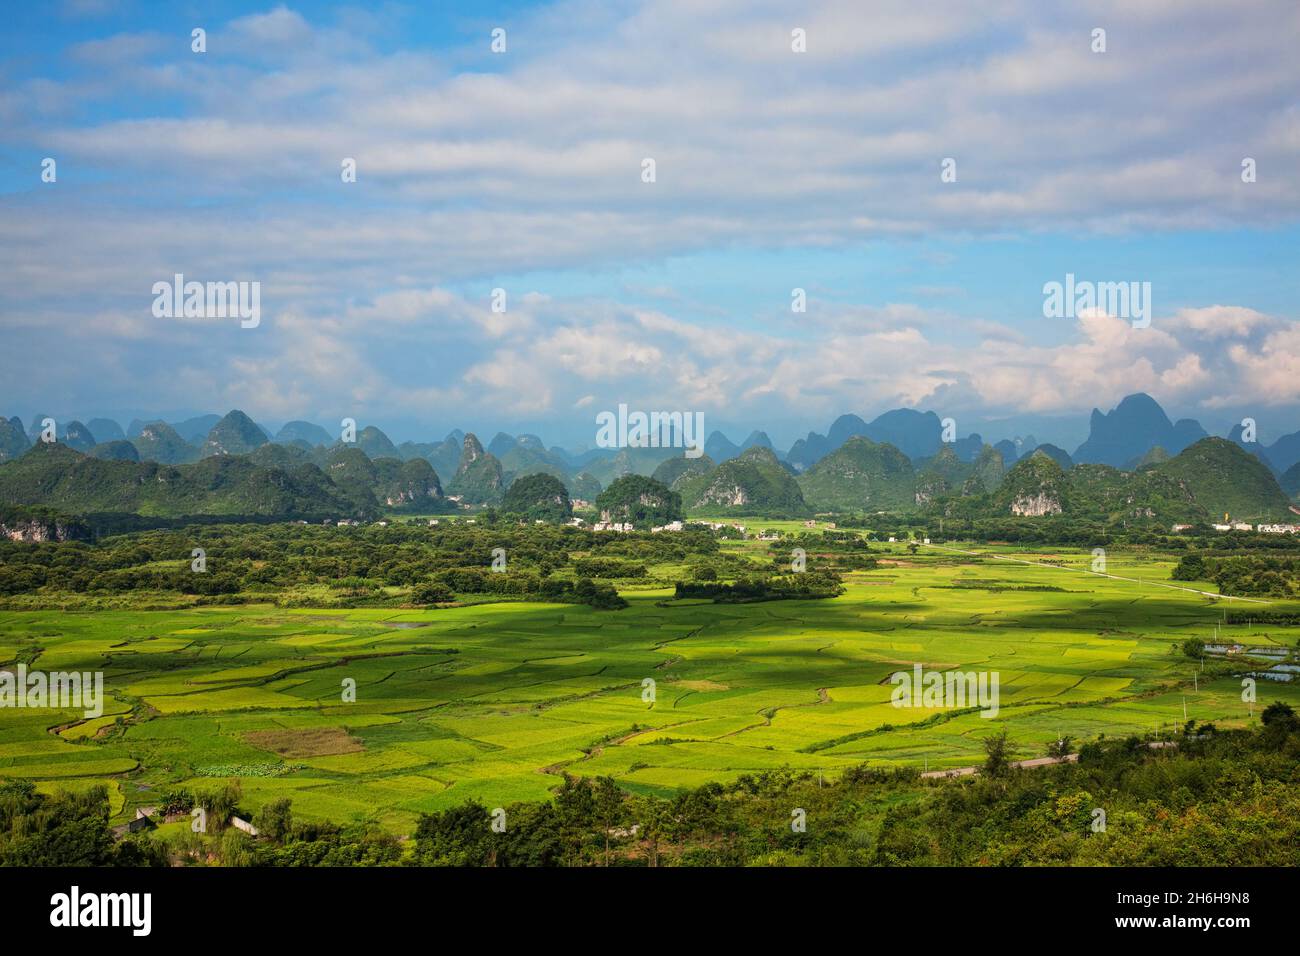 The beautiful countryside of Guilin, showing rice farms and Karst mountains.  Guangxi Zhuang Autonomous Region, China Stock Photo